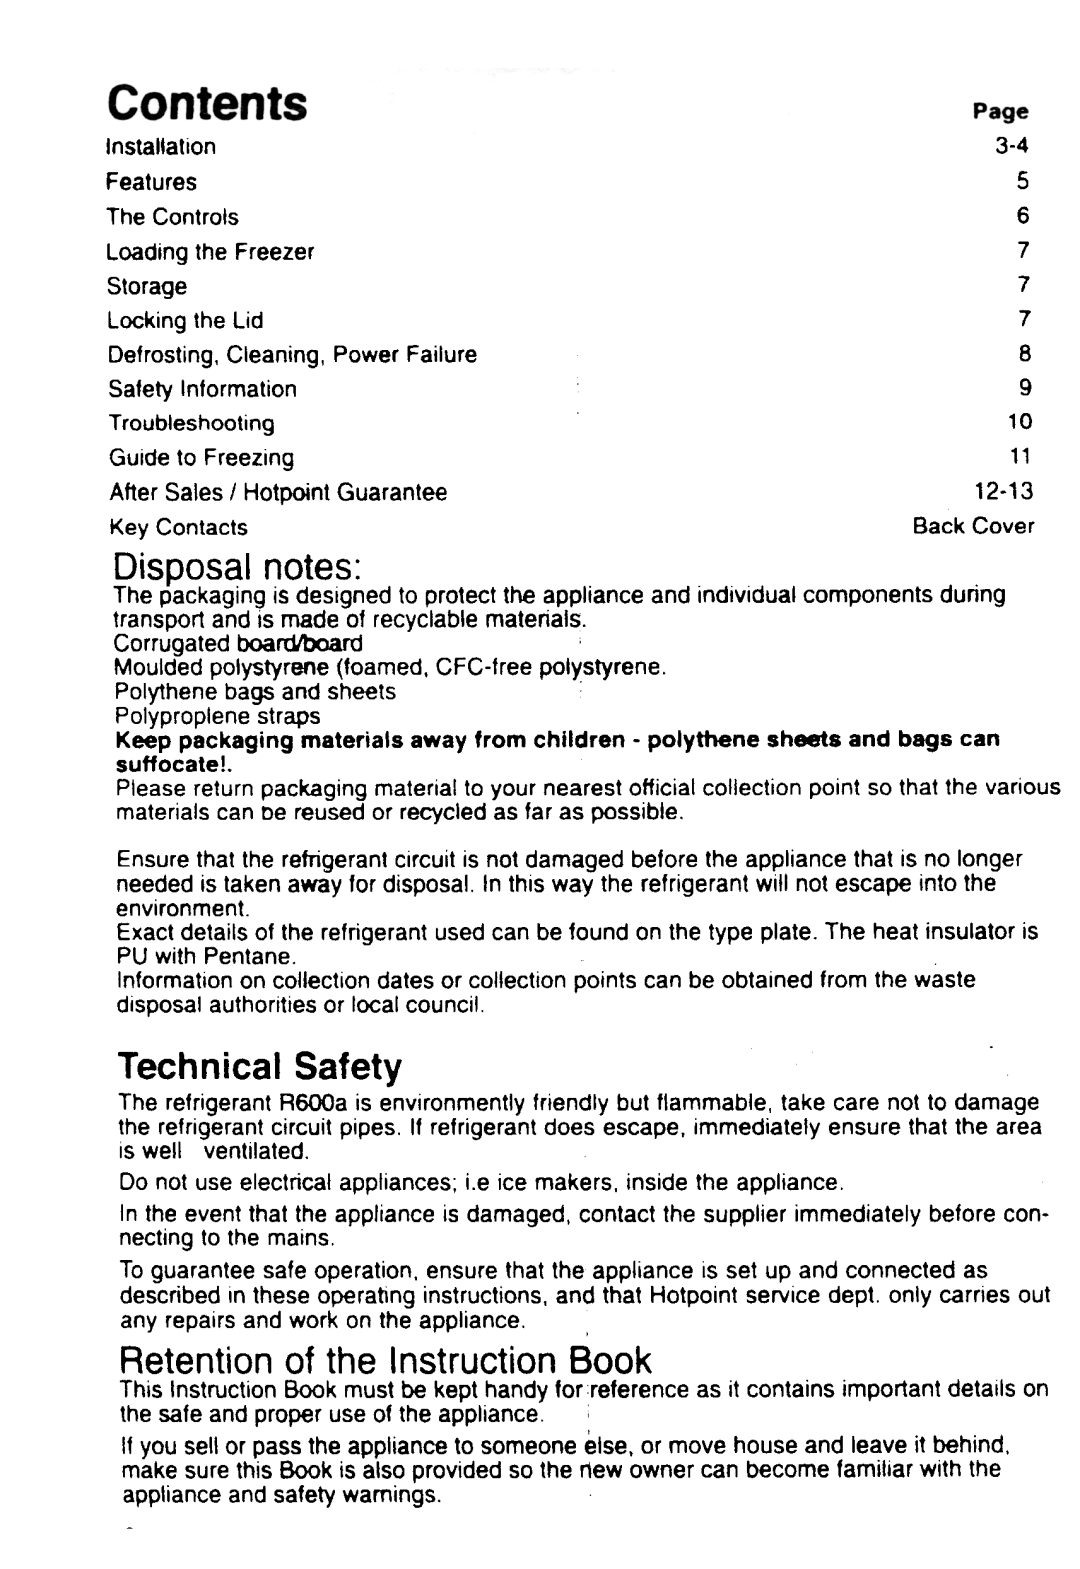 Hotpoint RC16P manual Disposal notes, Installation, Keeppackagingmaterialsaway from, Technical Safety 